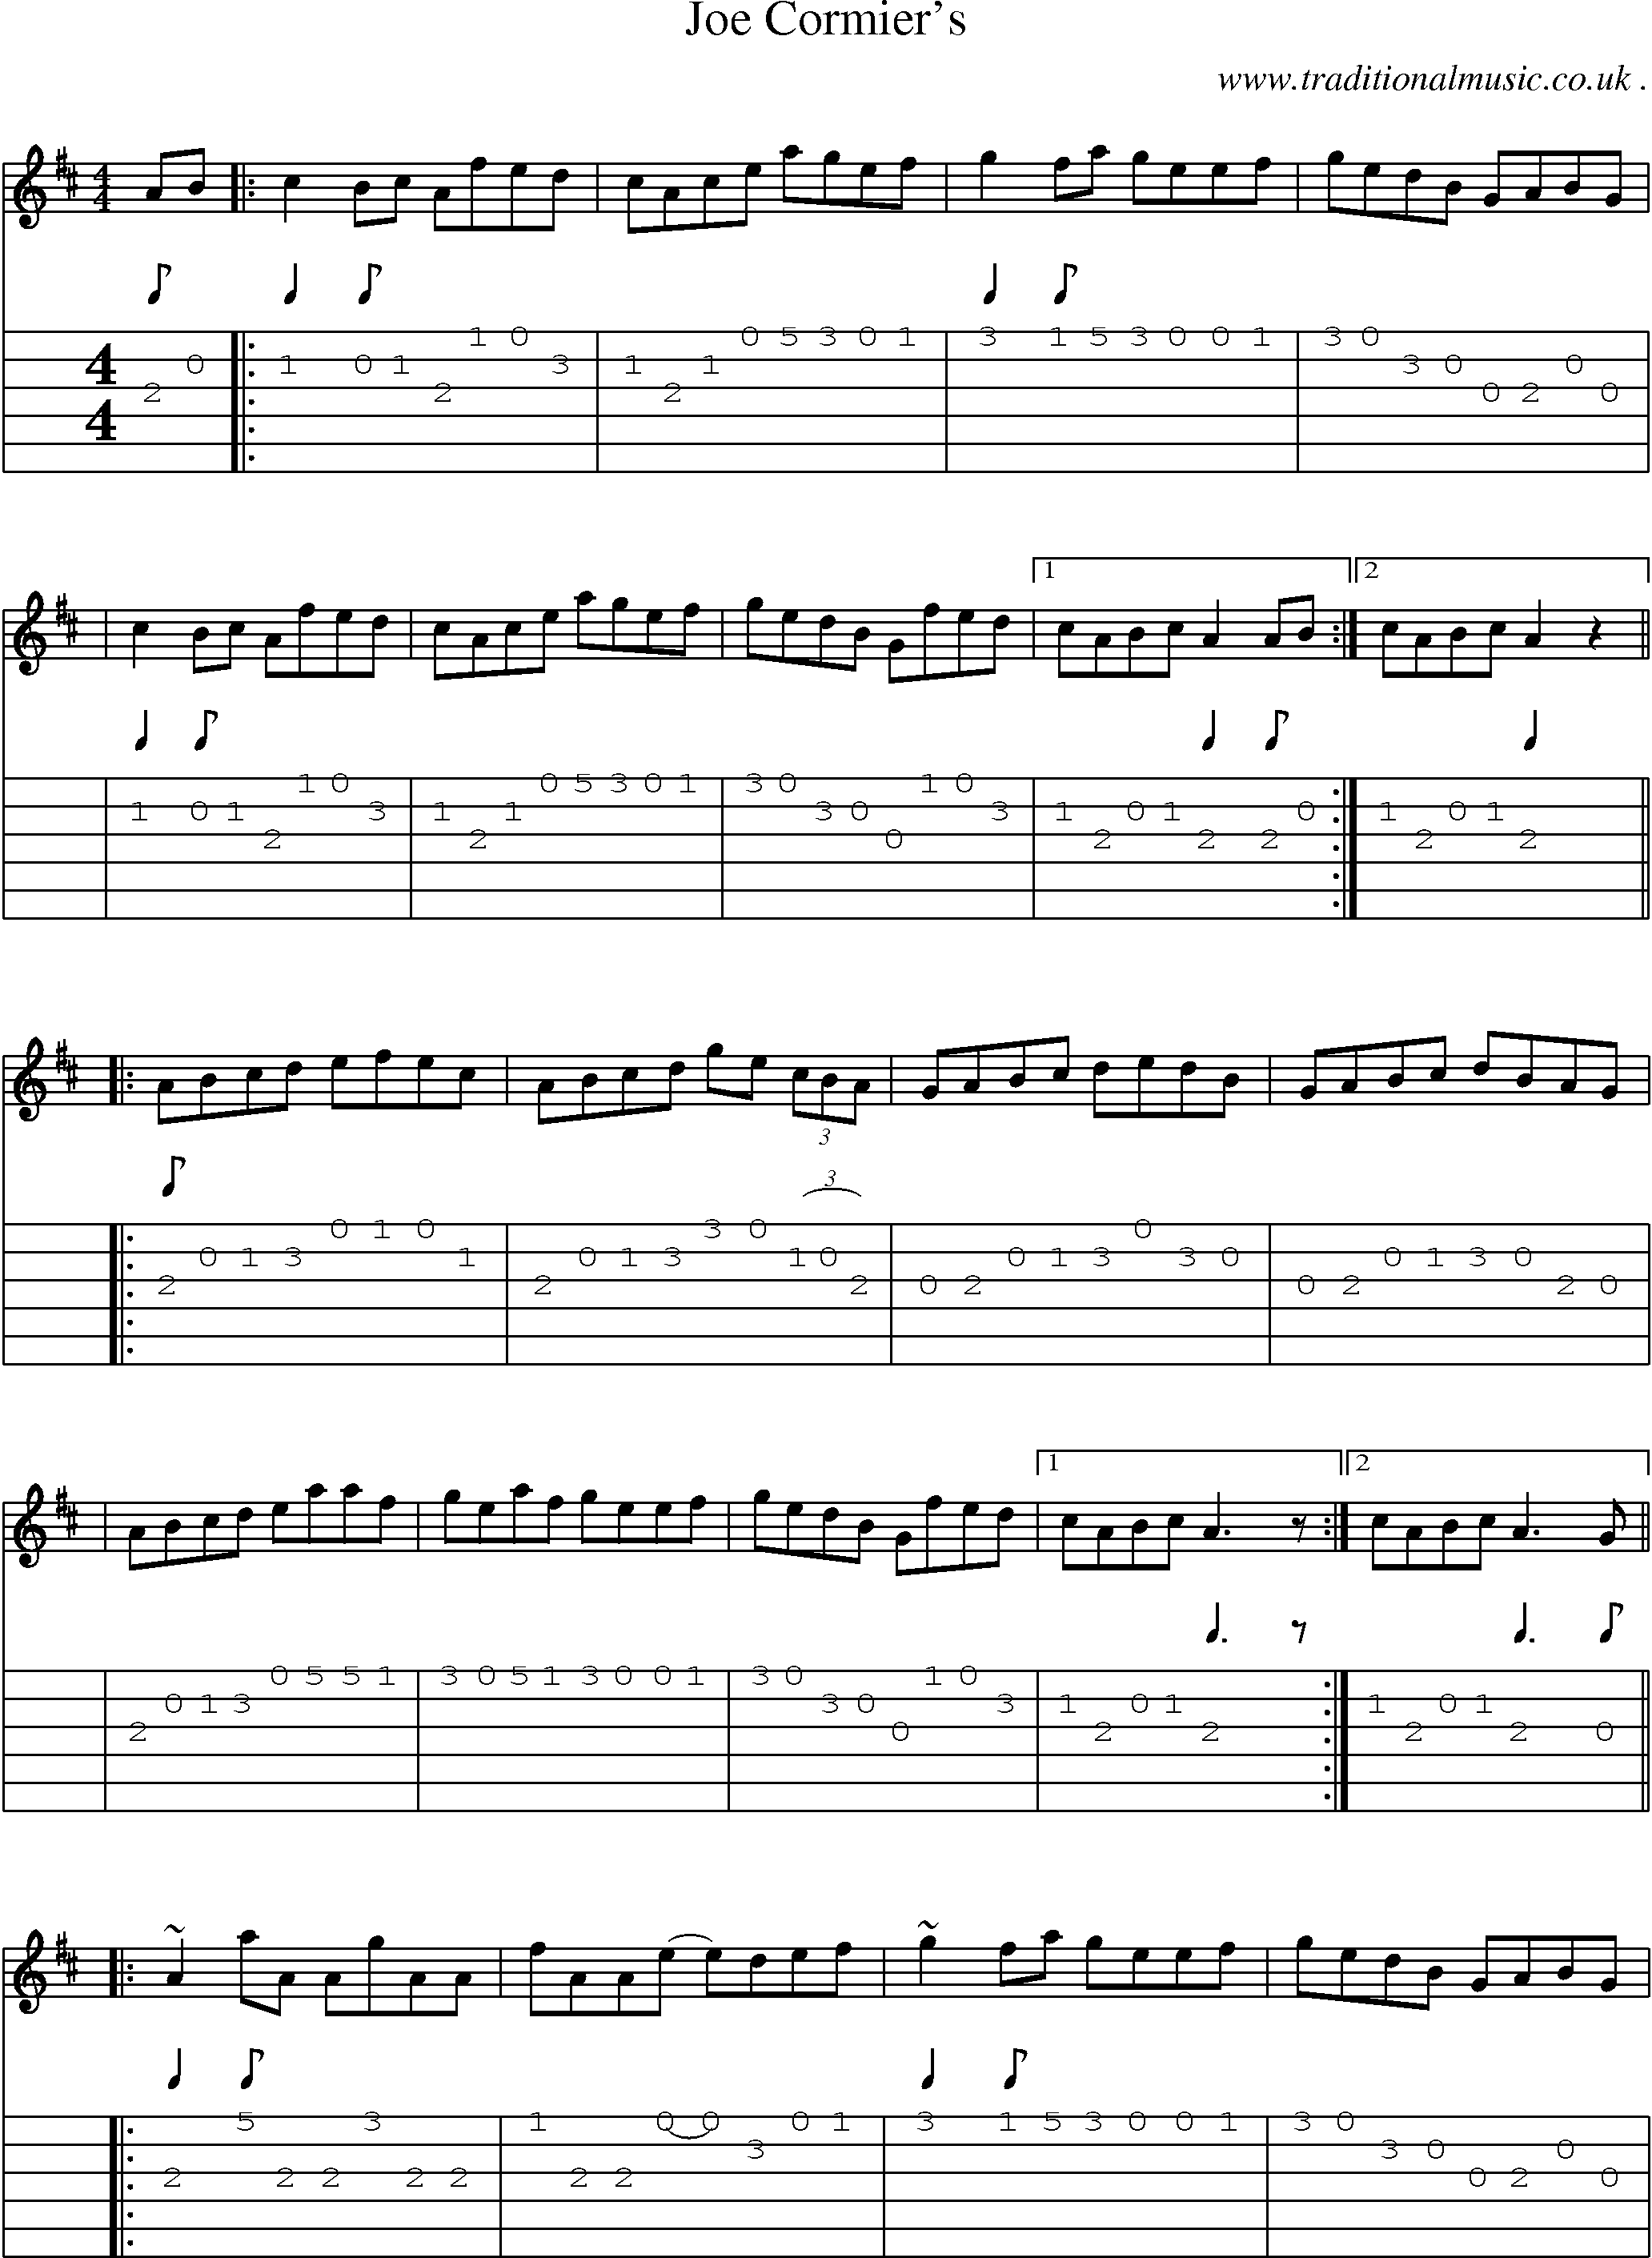 Sheet-music  score, Chords and Guitar Tabs for Joe Cormiers